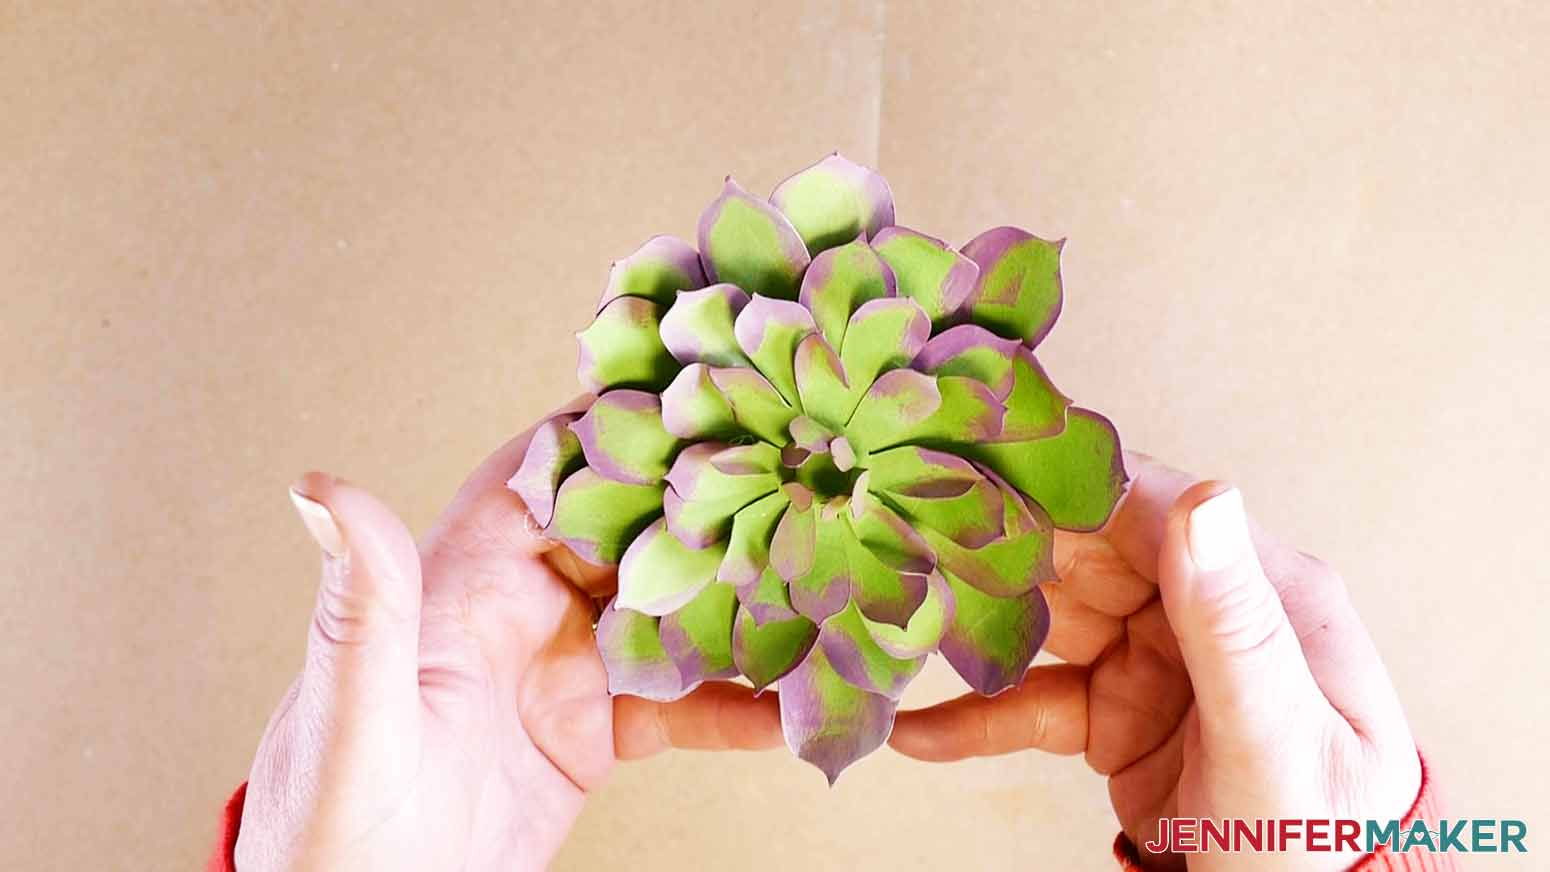 This is what my finished succulent seven looks like from my paper succulents project